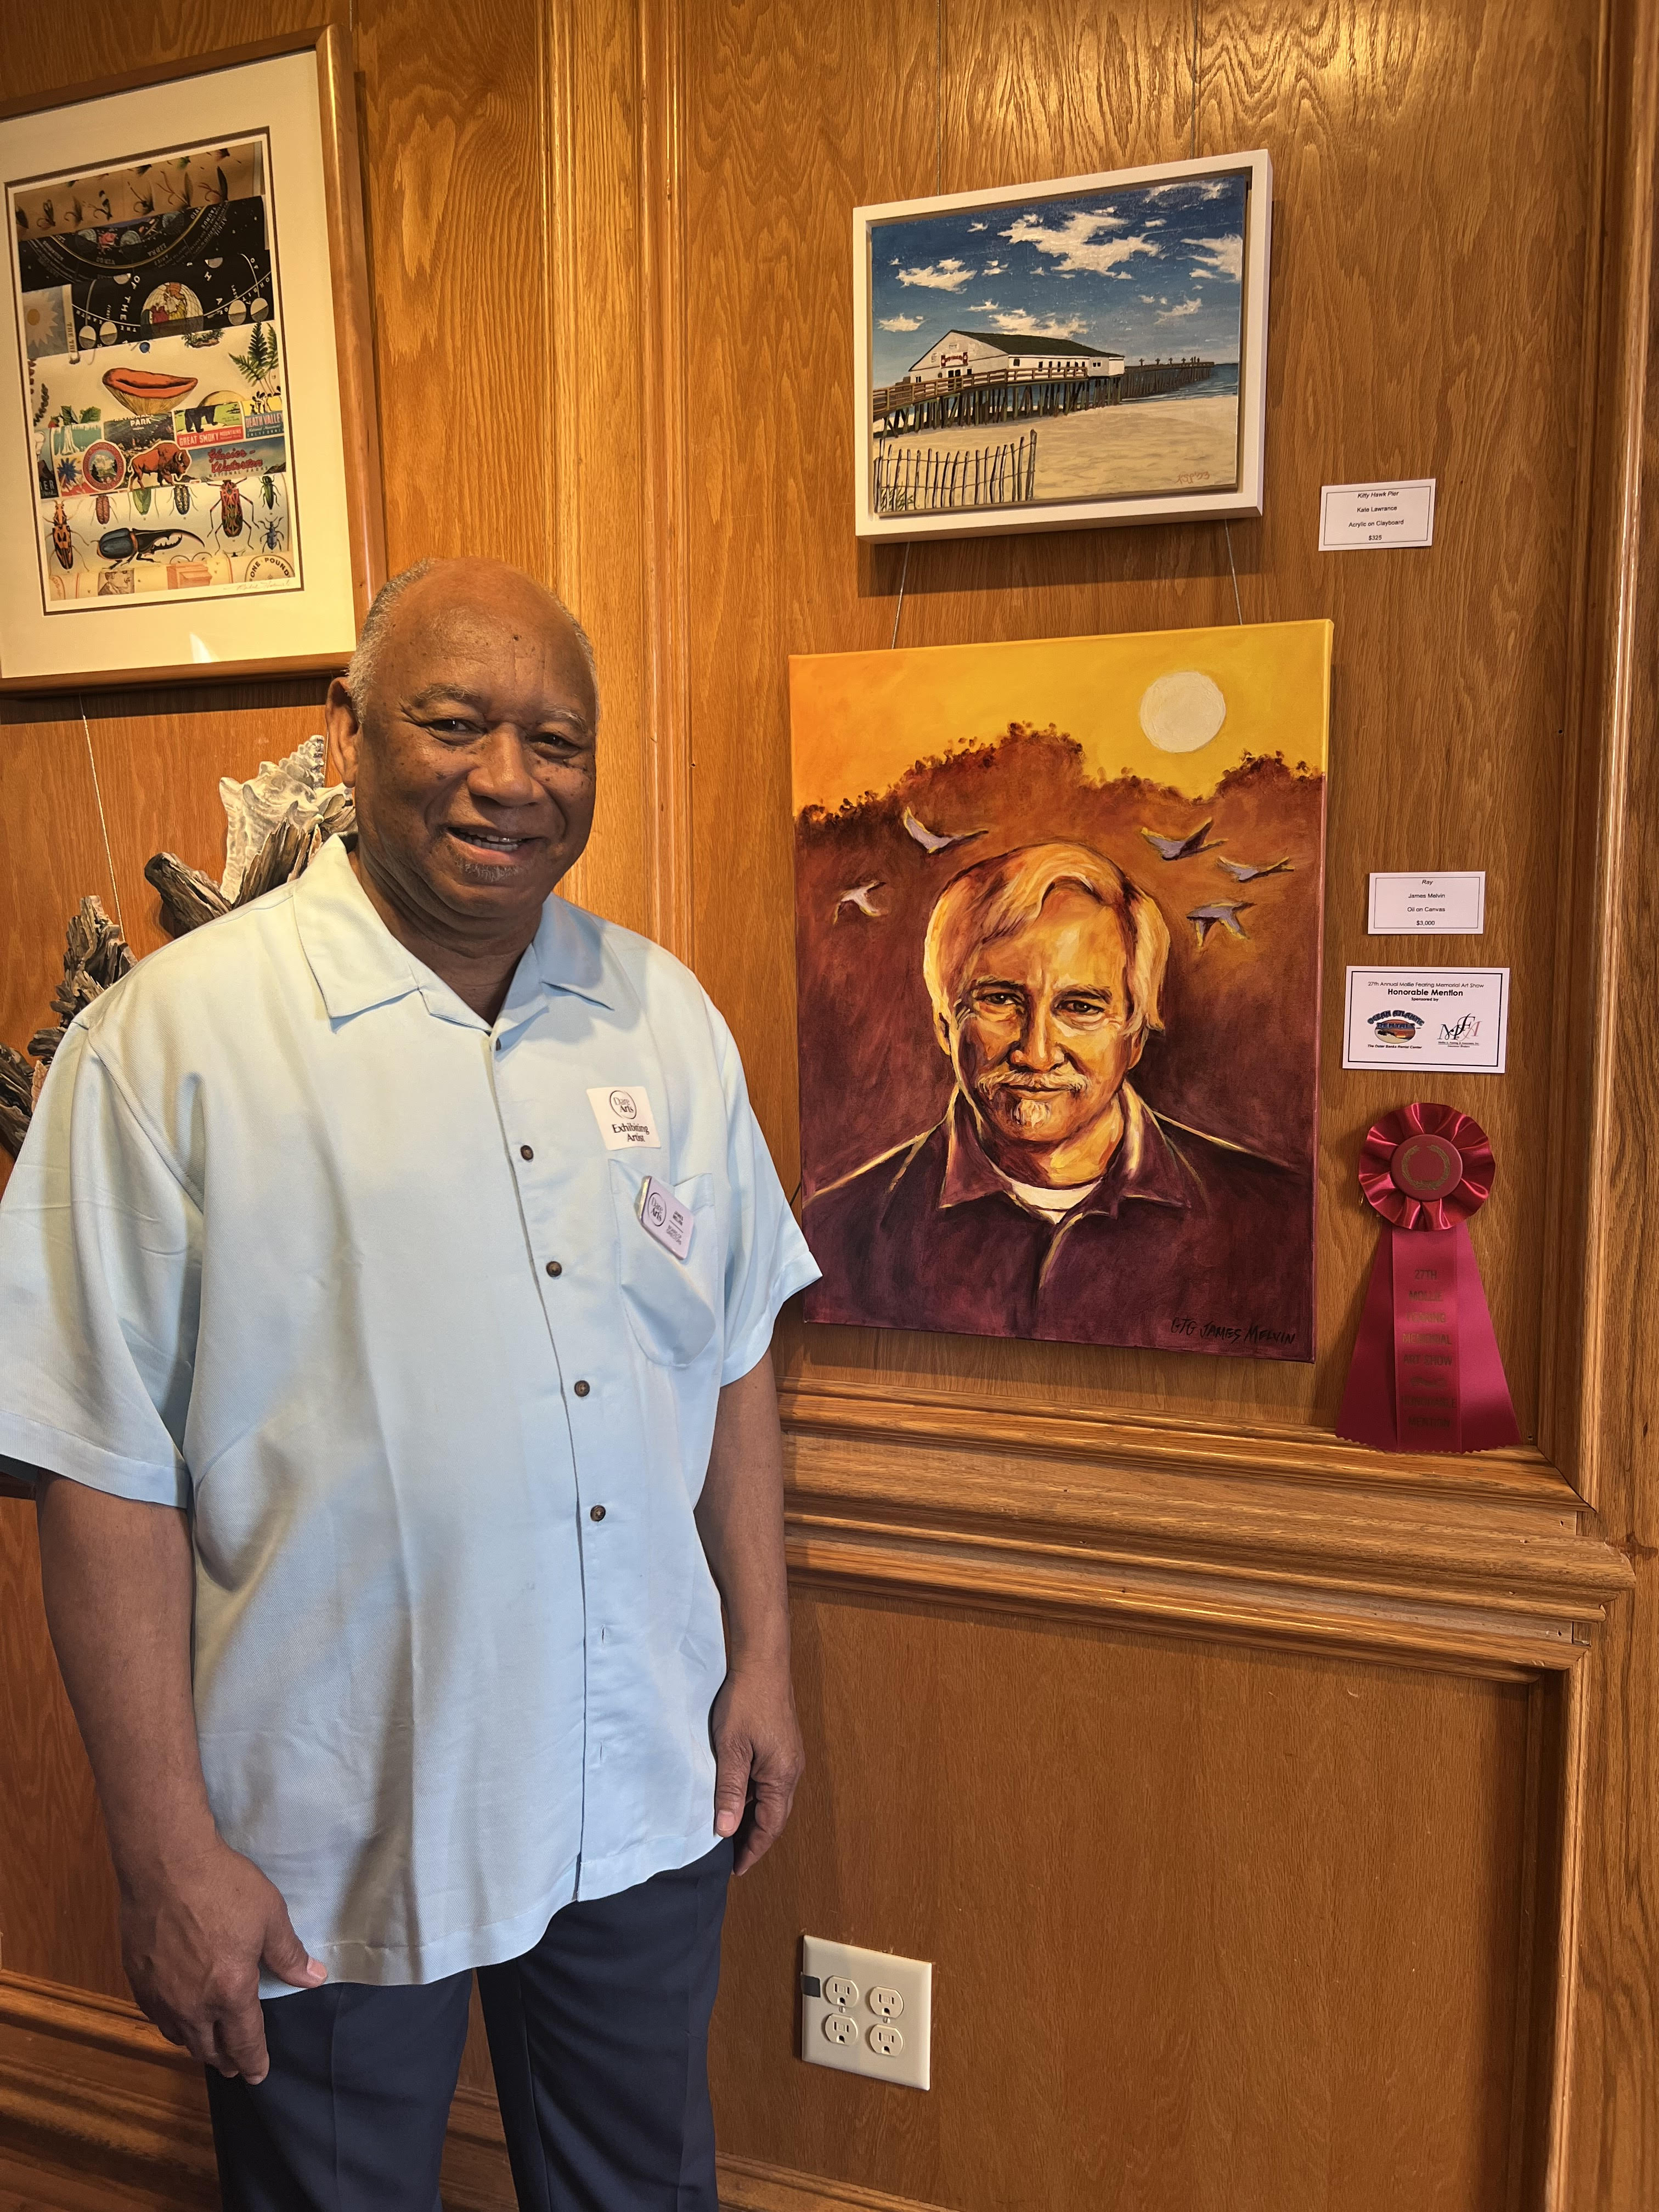 Honorable Mention award recipient James Melvin and his piece “Ray” (oil). Photo courtesy of Dare Arts.